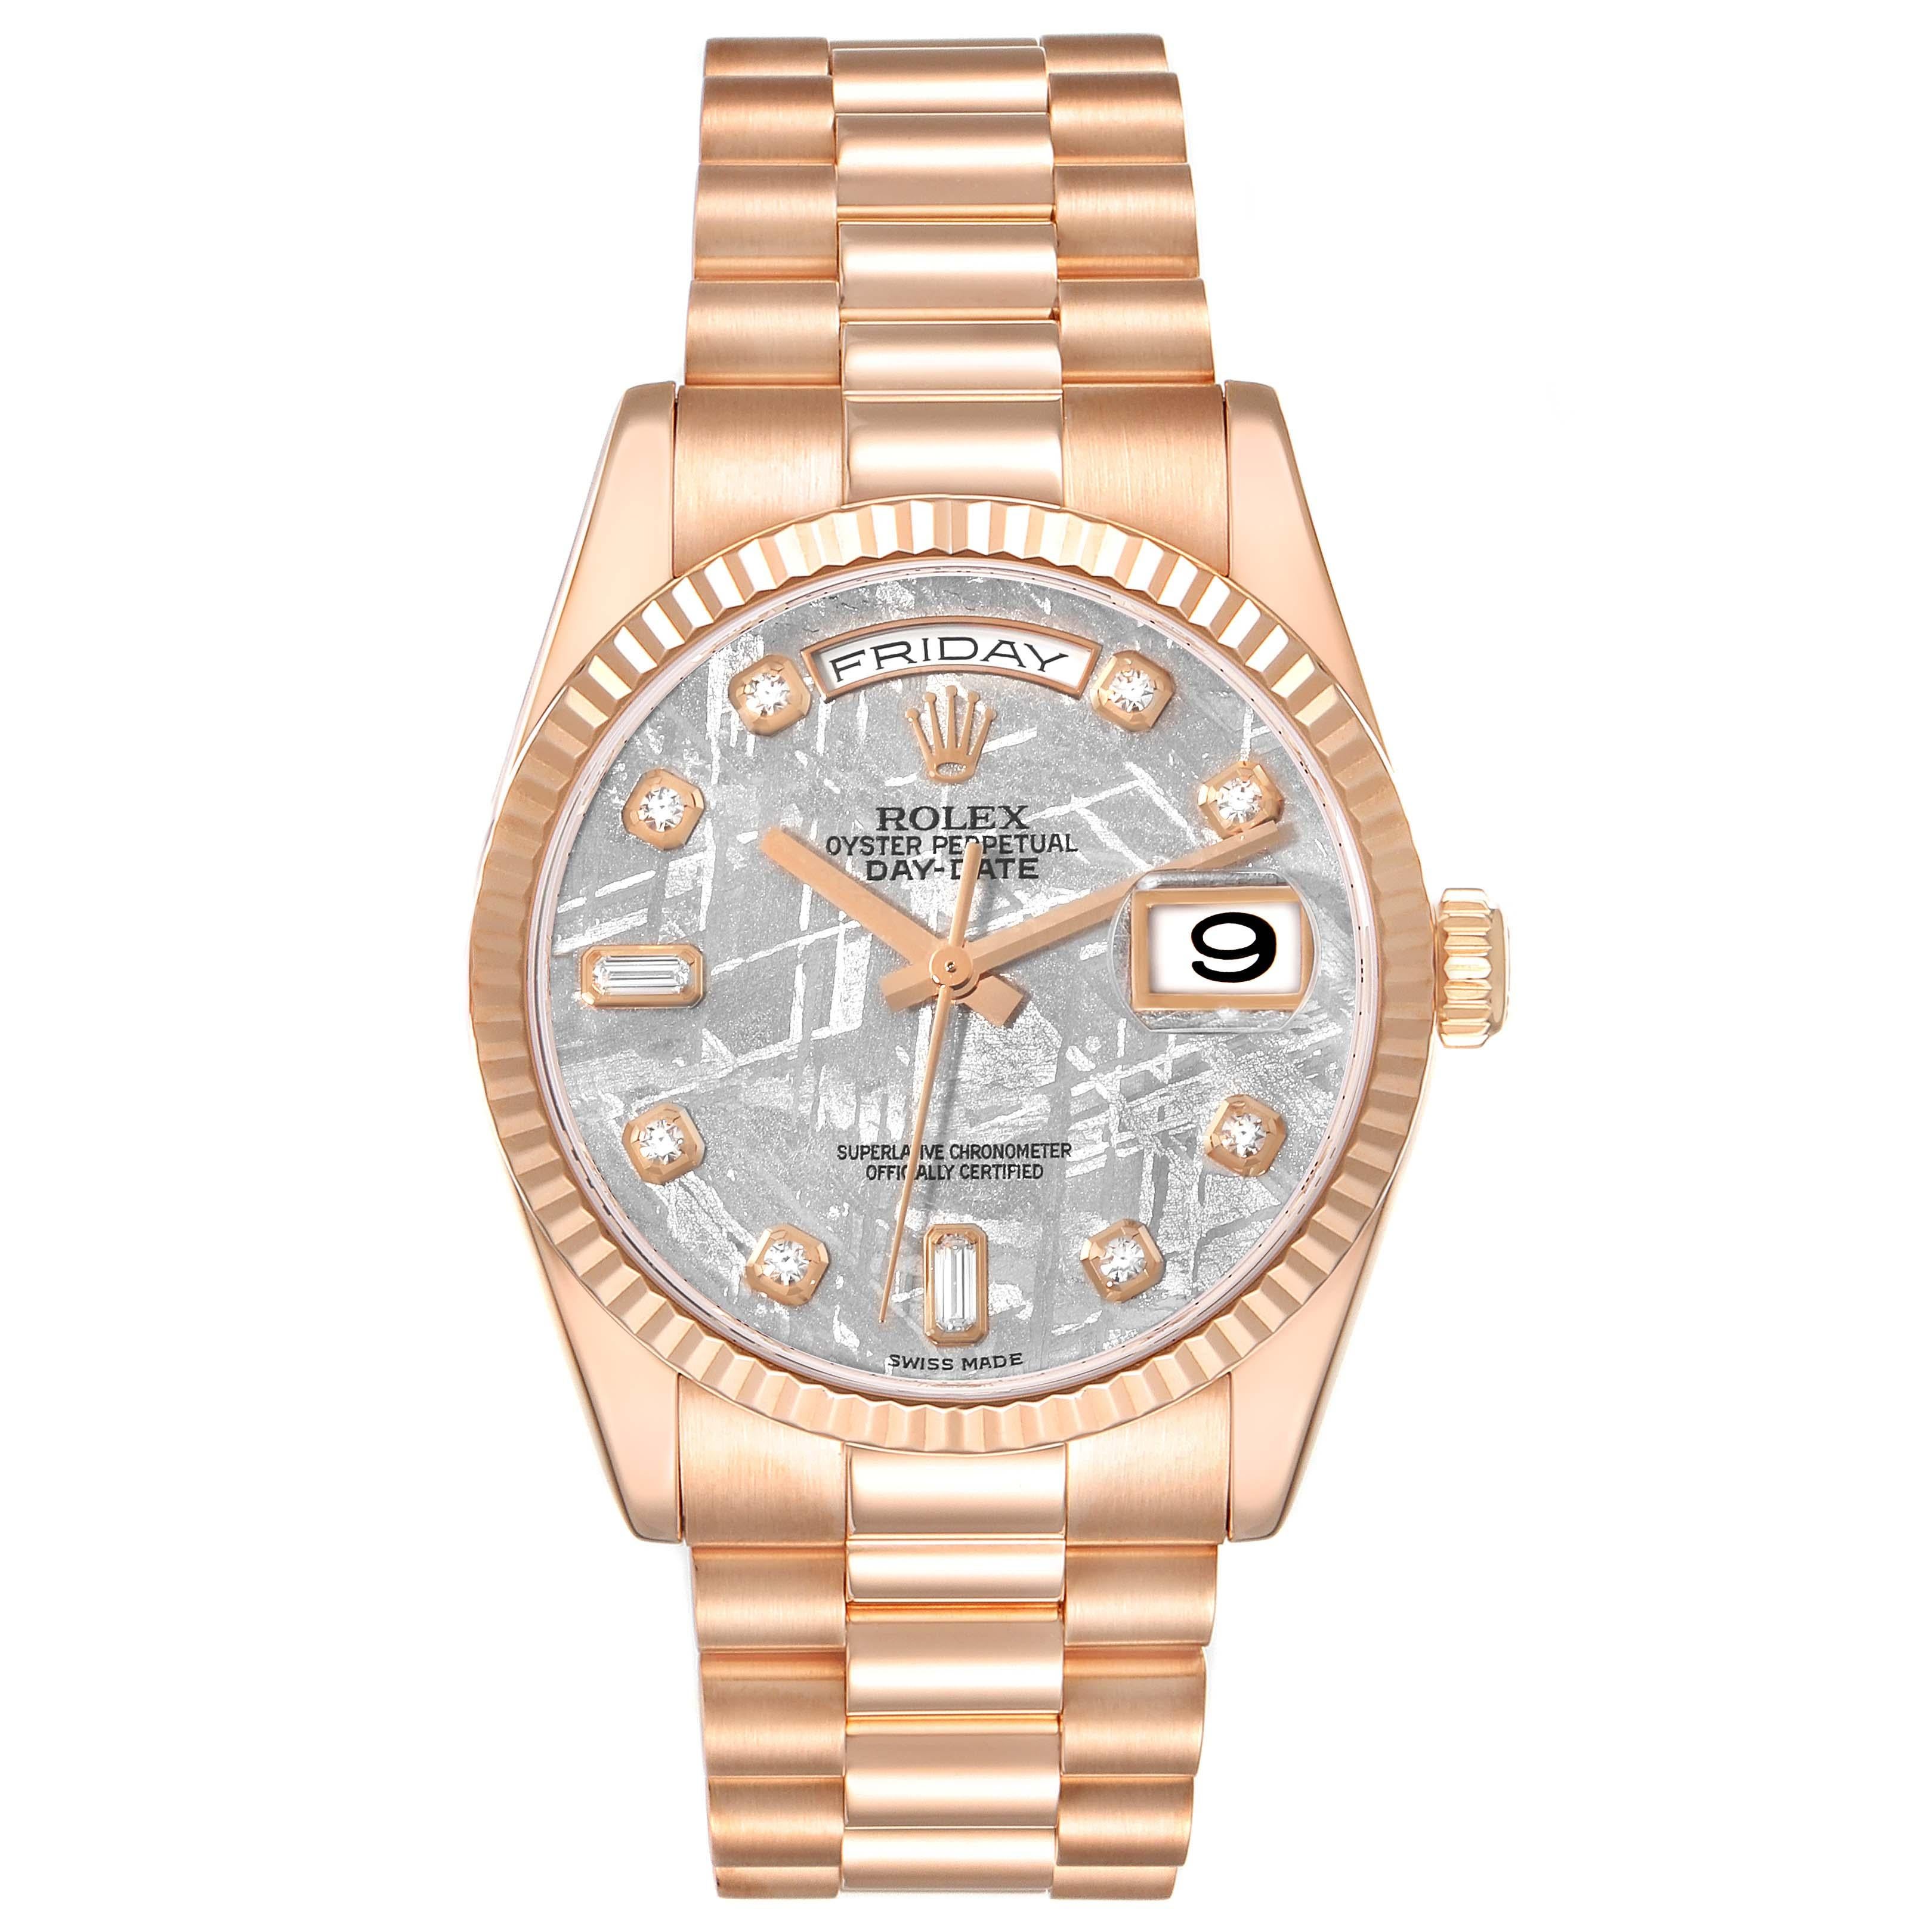 Rolex President Day-Date Rose Gold Meteorite Diamond Dial Mens Watch 118235. Officially certified chronometer automatic self-winding movement. Double quick set function. 18k Everose gold oyster case 36.0 mm in diameter. Rolex logo on the crown. 18K